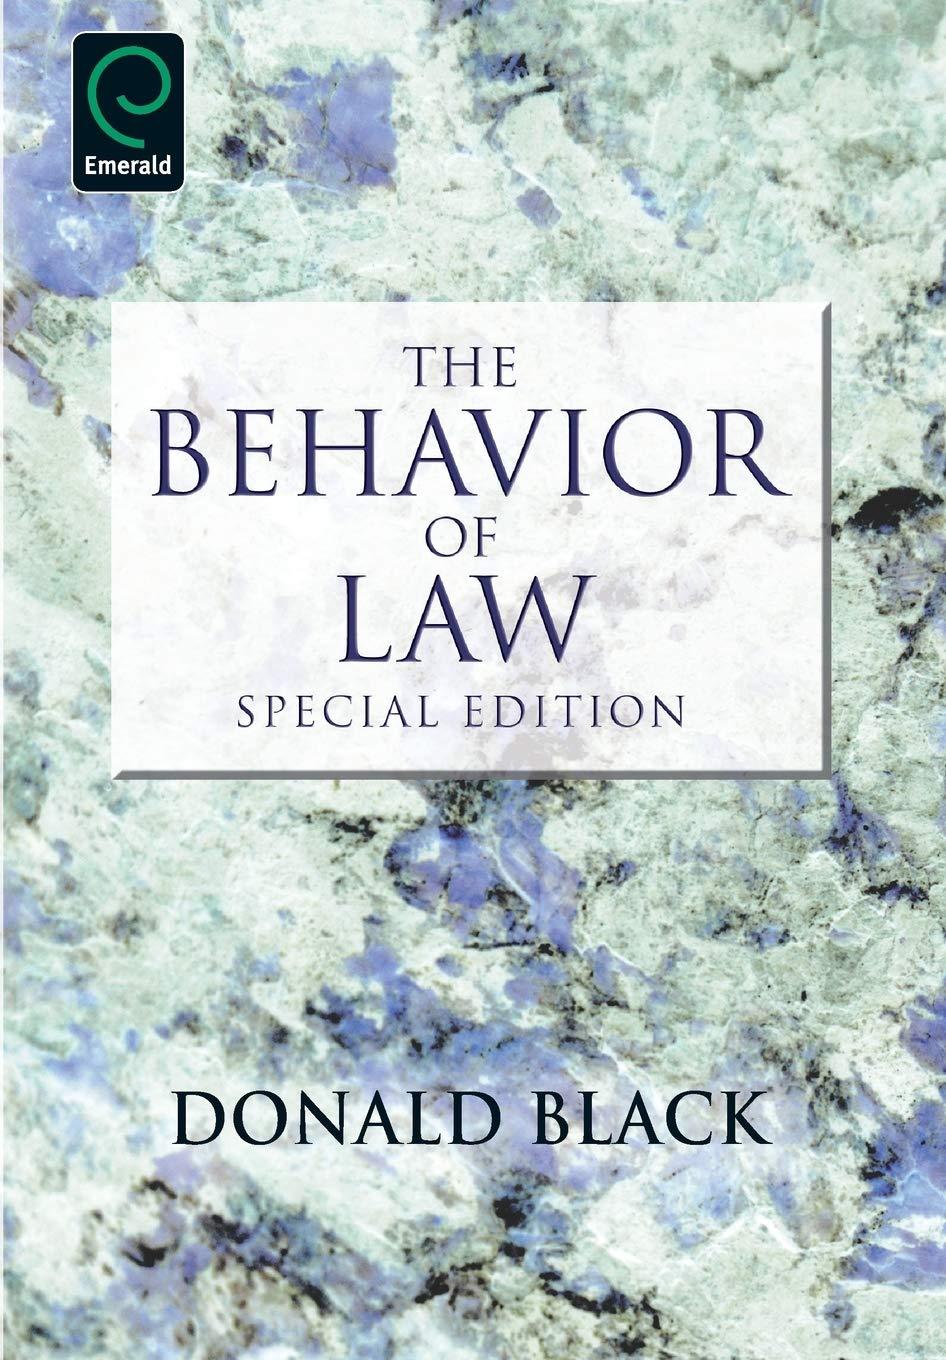 The Behavior of Law, special edition